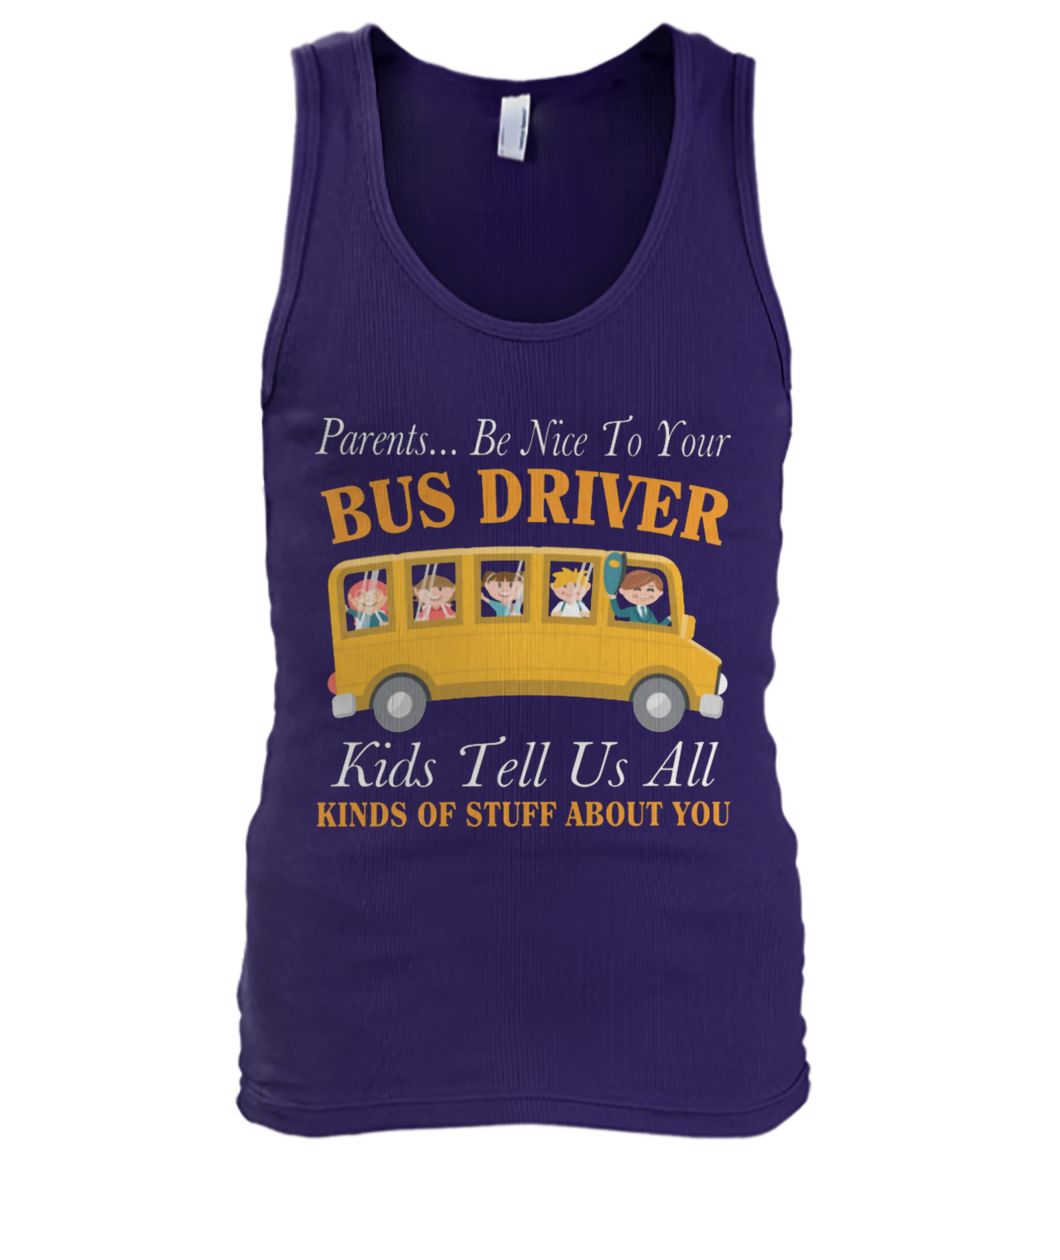 Parents be nice to your bus driver kids tell us all kinds of stuff about you men's tank top